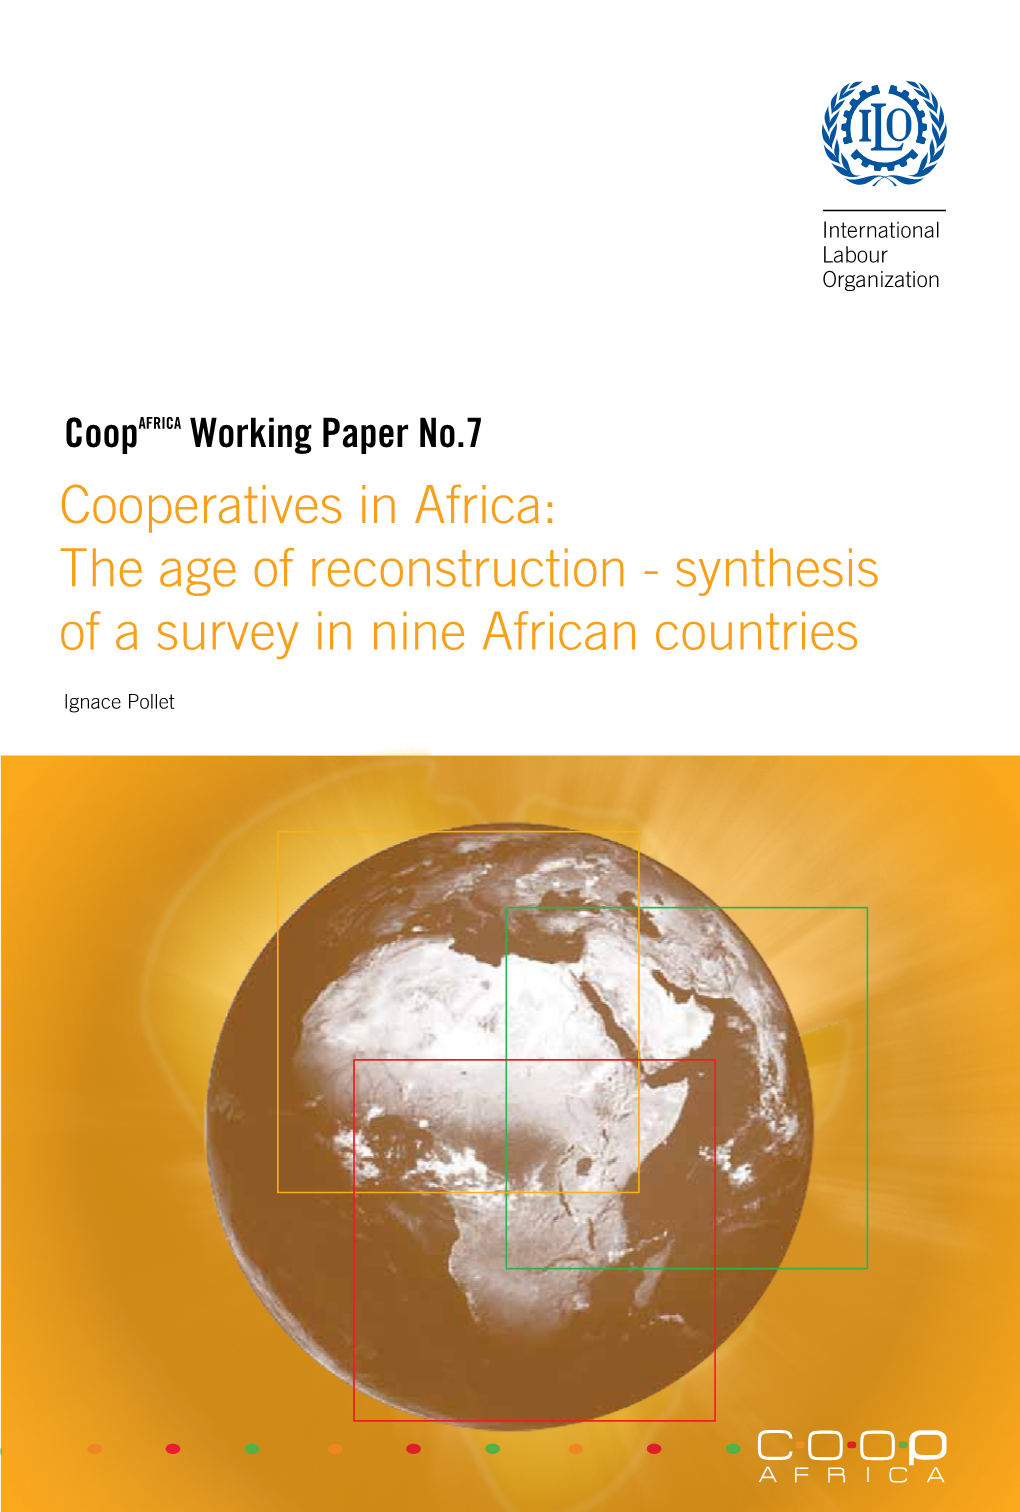 The Age of Reconstruction - Synthesis for Other Policy Domains and the Position of Cooperatives As a Vehicle for Development